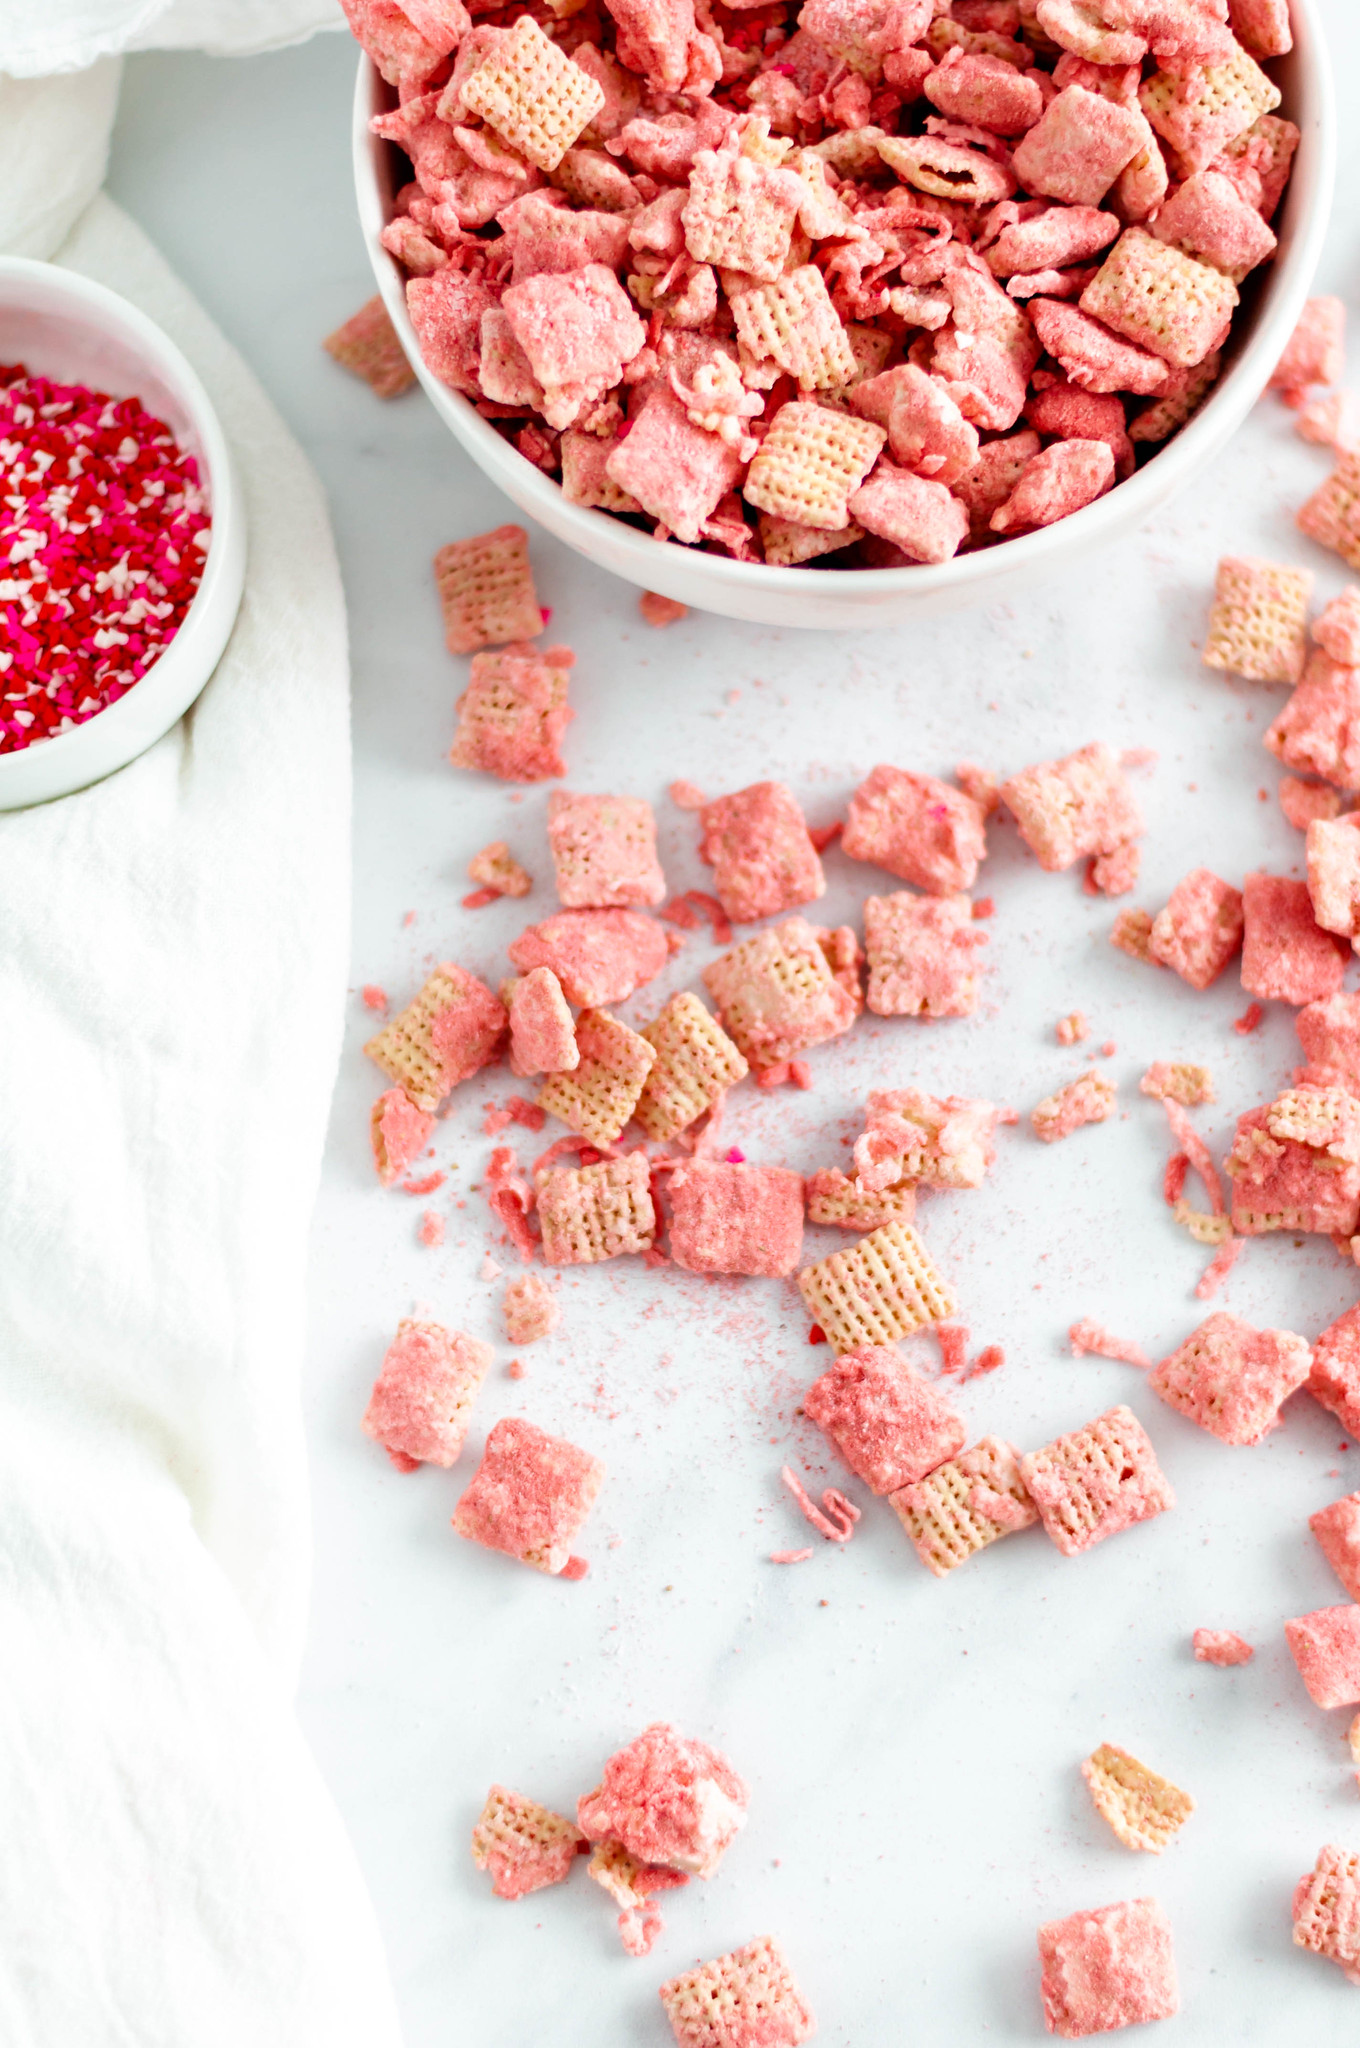 Make your Valentines Day festive with this Coconut Strawberry Puppy Chow. White chocolate, freeze dried strawberries & coconut are such a sweet combination.